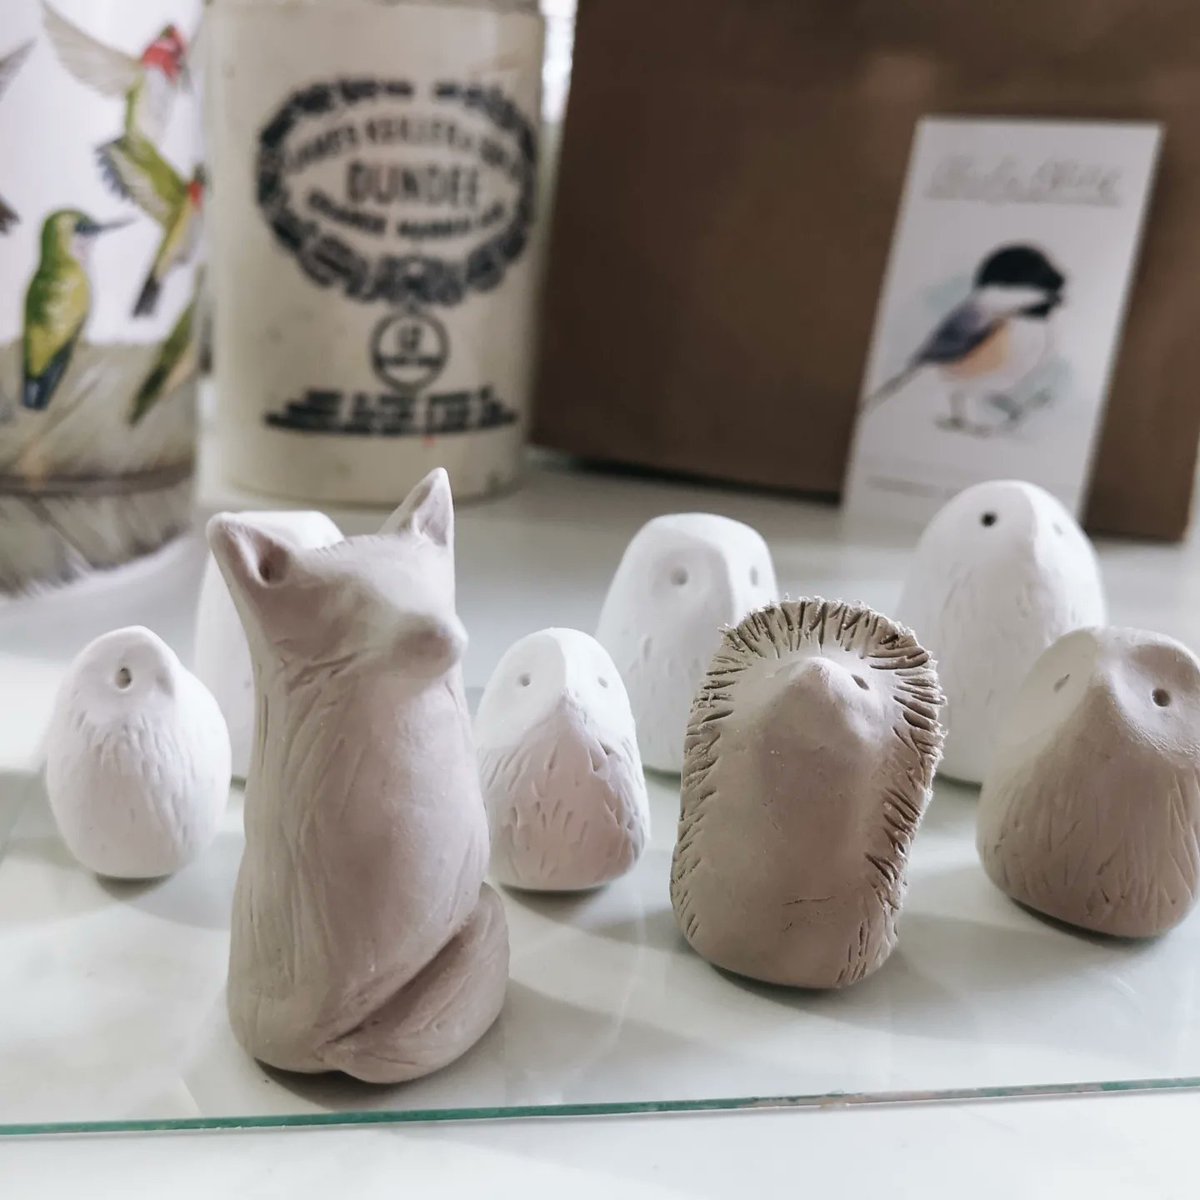 Today in the studio. Owls,  hedgehogs & foxes. What's on your desk today?

#clayanimals #owls #art #createexplore #fox #sculpture #chathamkent